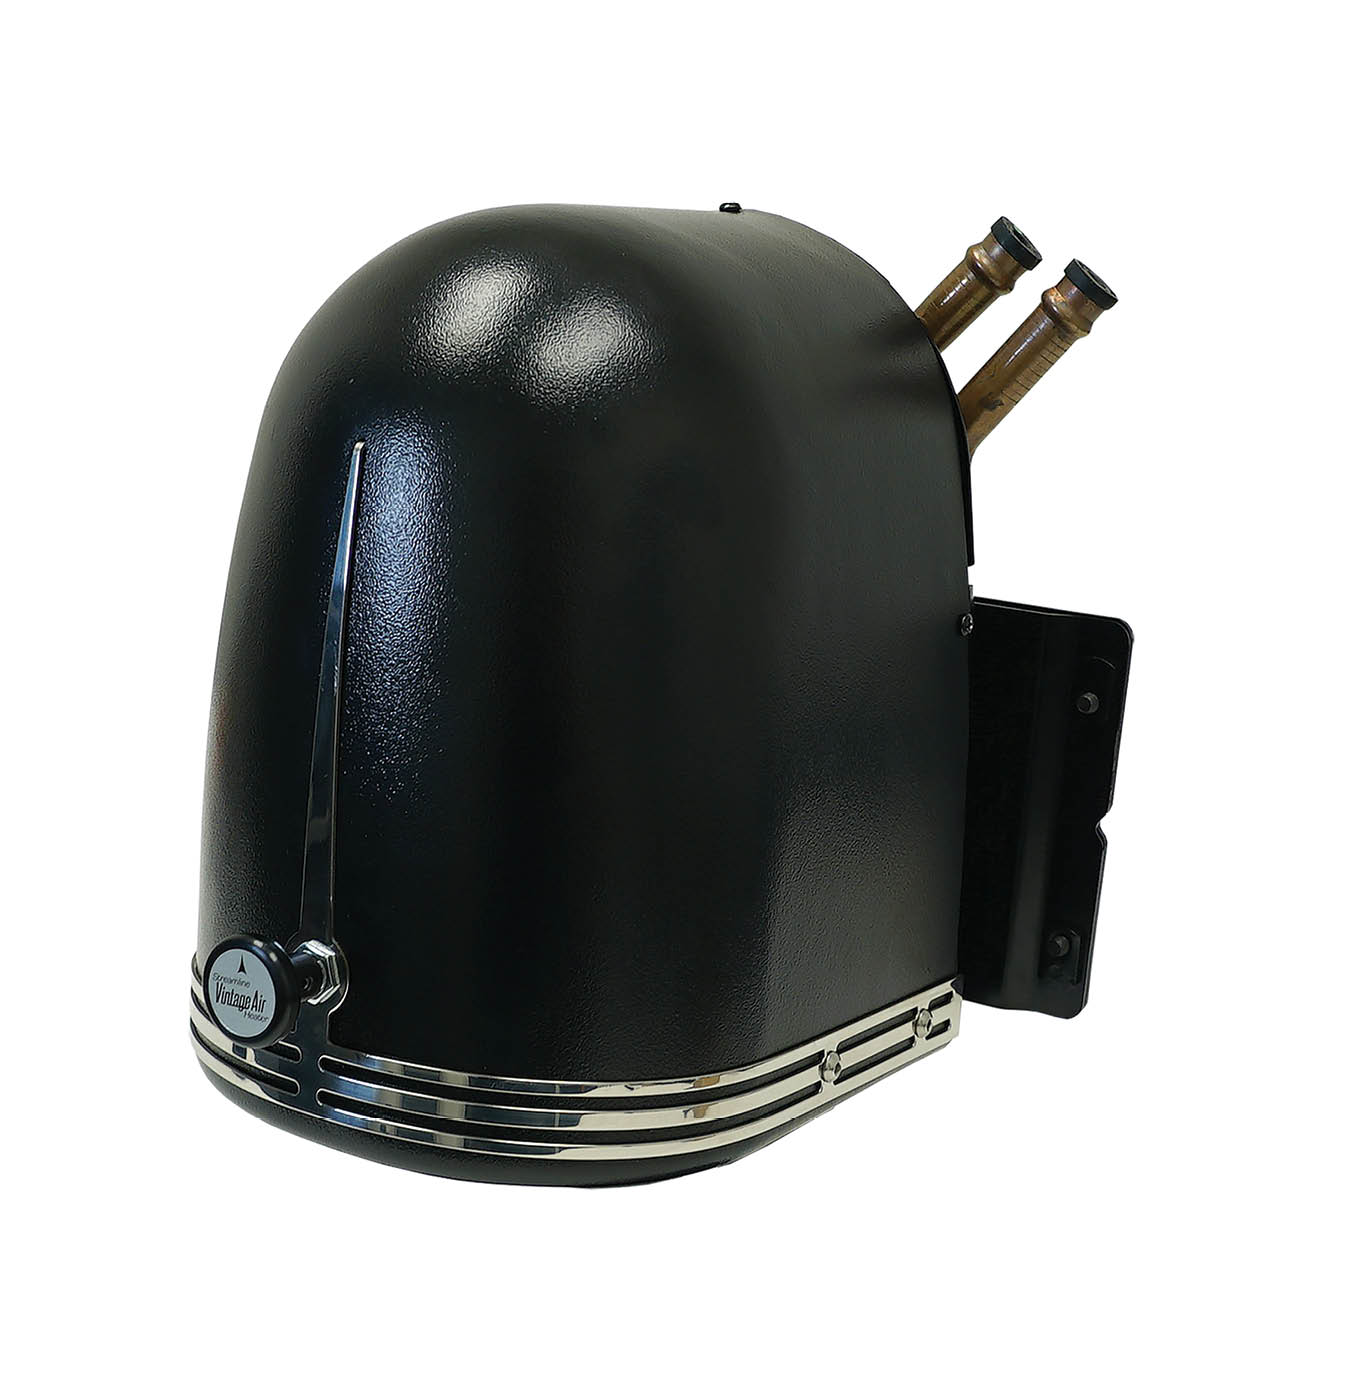 The Vintage Air Streamline Heater is modeled after the Art Deco–style of the ’30s. Made with a molded plastic cover it has three speeds. The standard black ABS cover can be painted to match your interior colors.